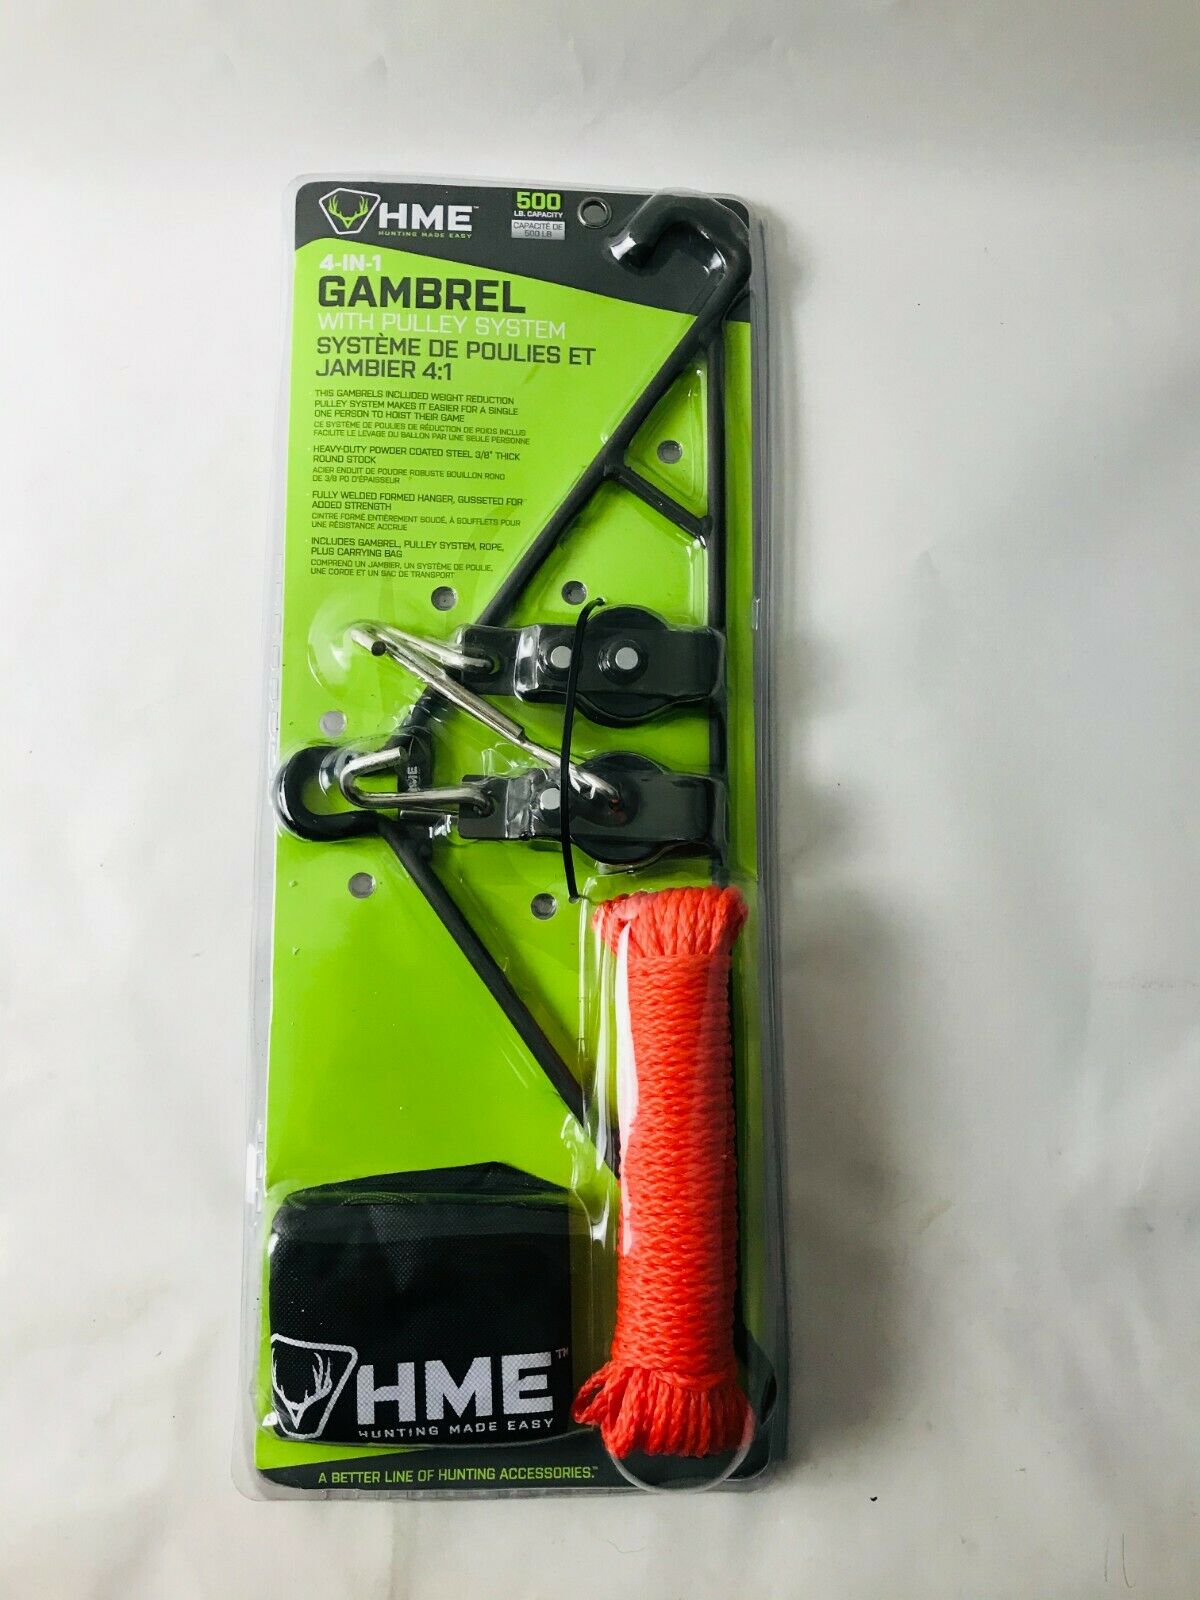 New! Hme 4-in-1 Gambrel With Pulley System 500 Lb Capacity